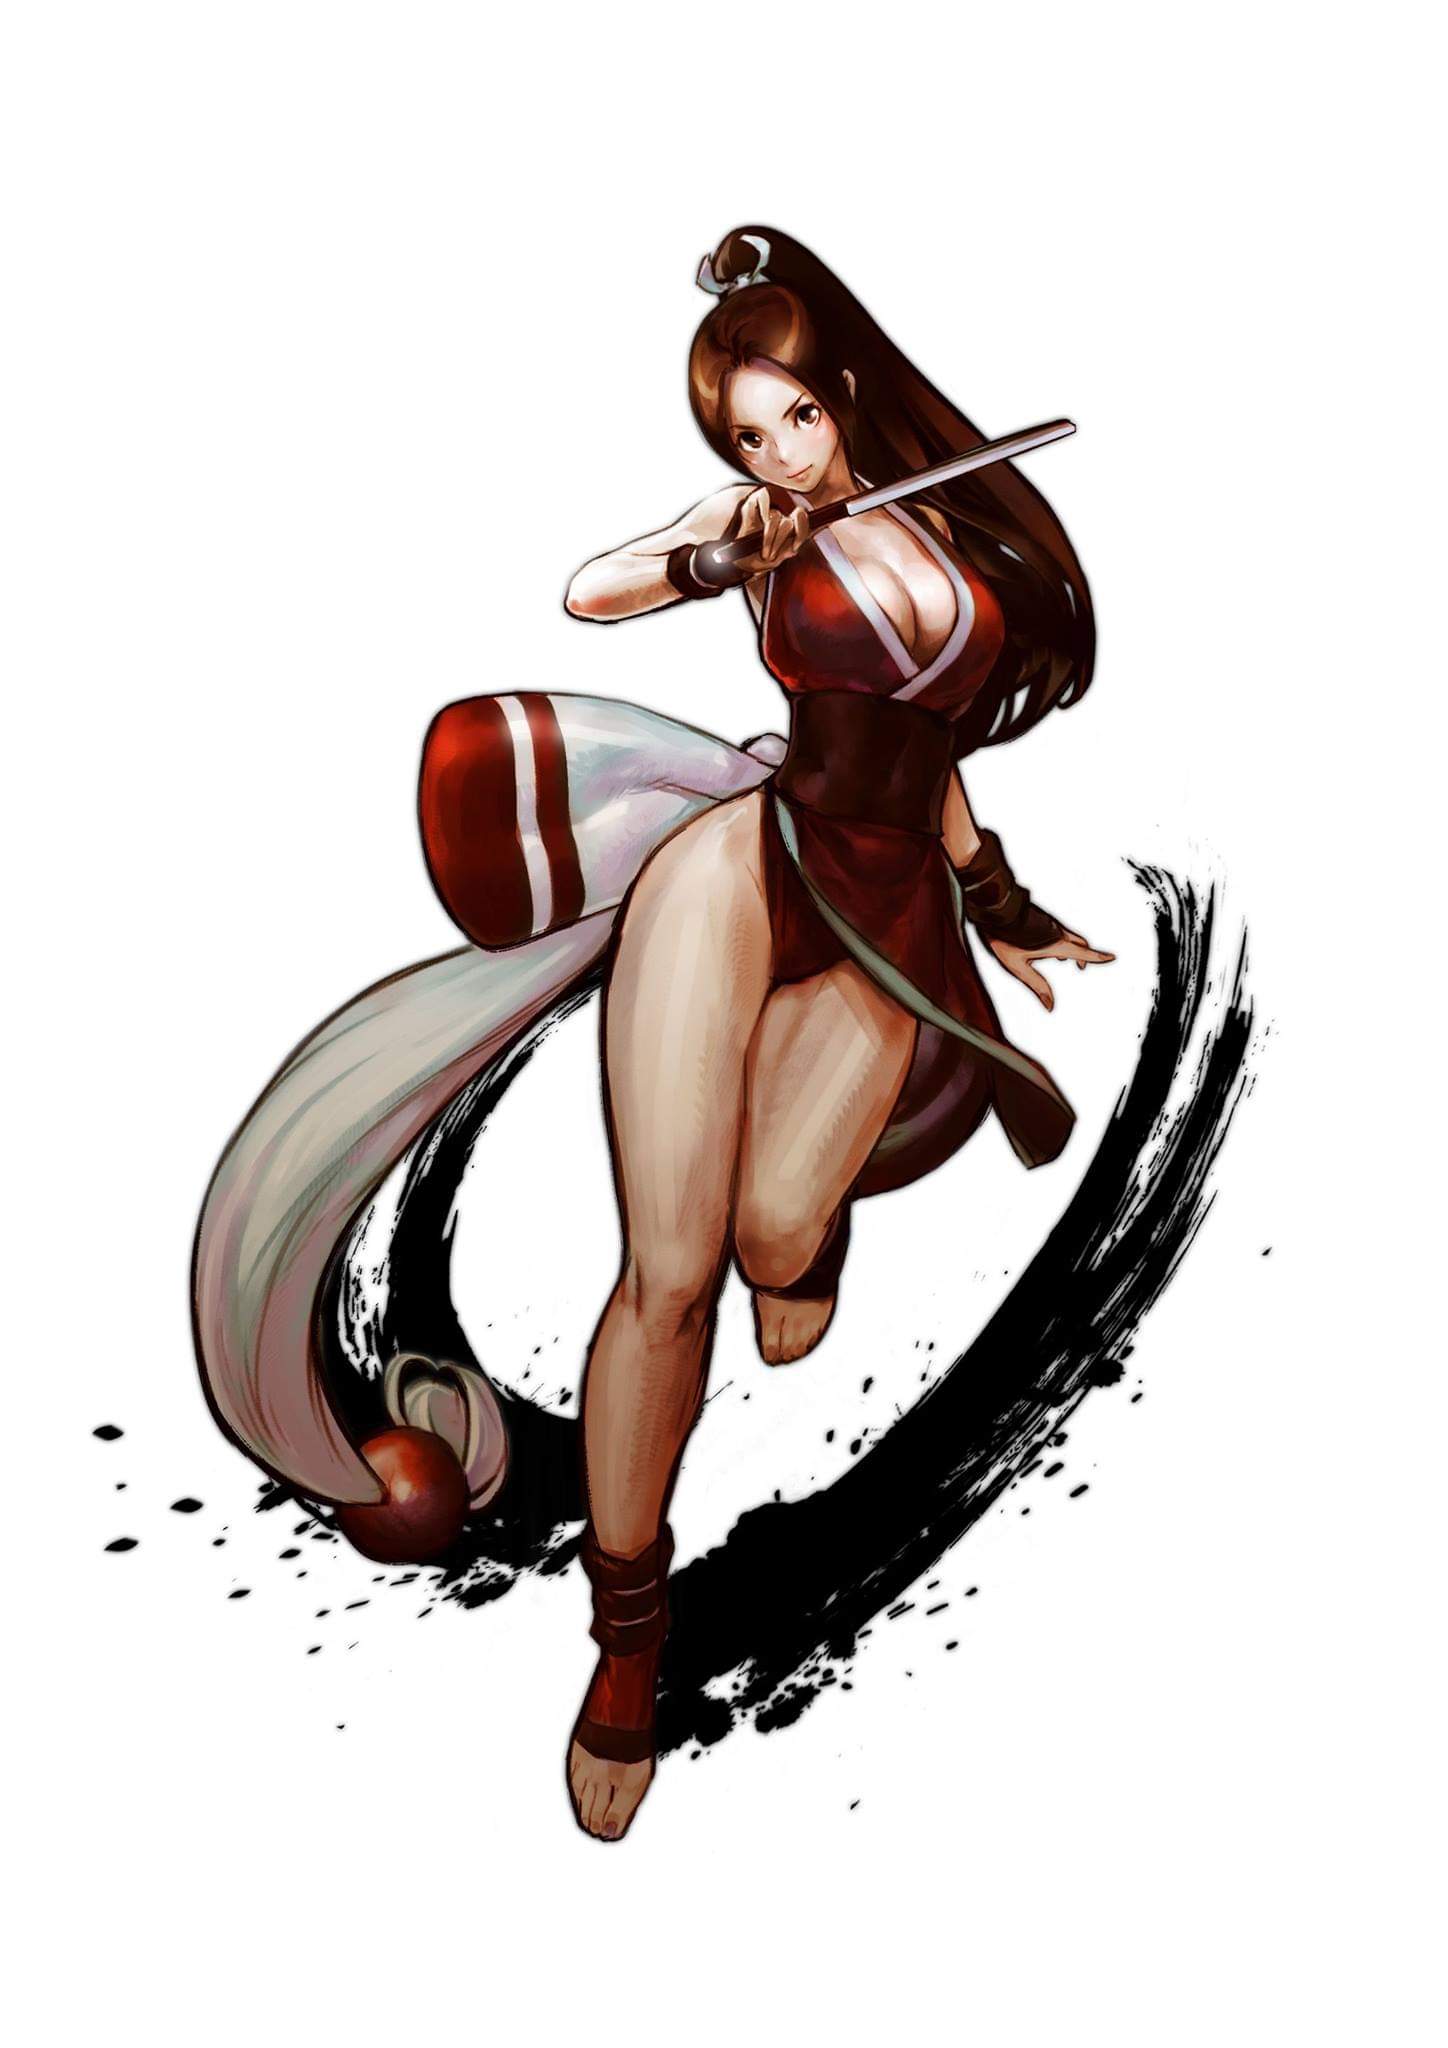 Women Fighters Team - The King of Fighters XIV by Zeref-ftx on